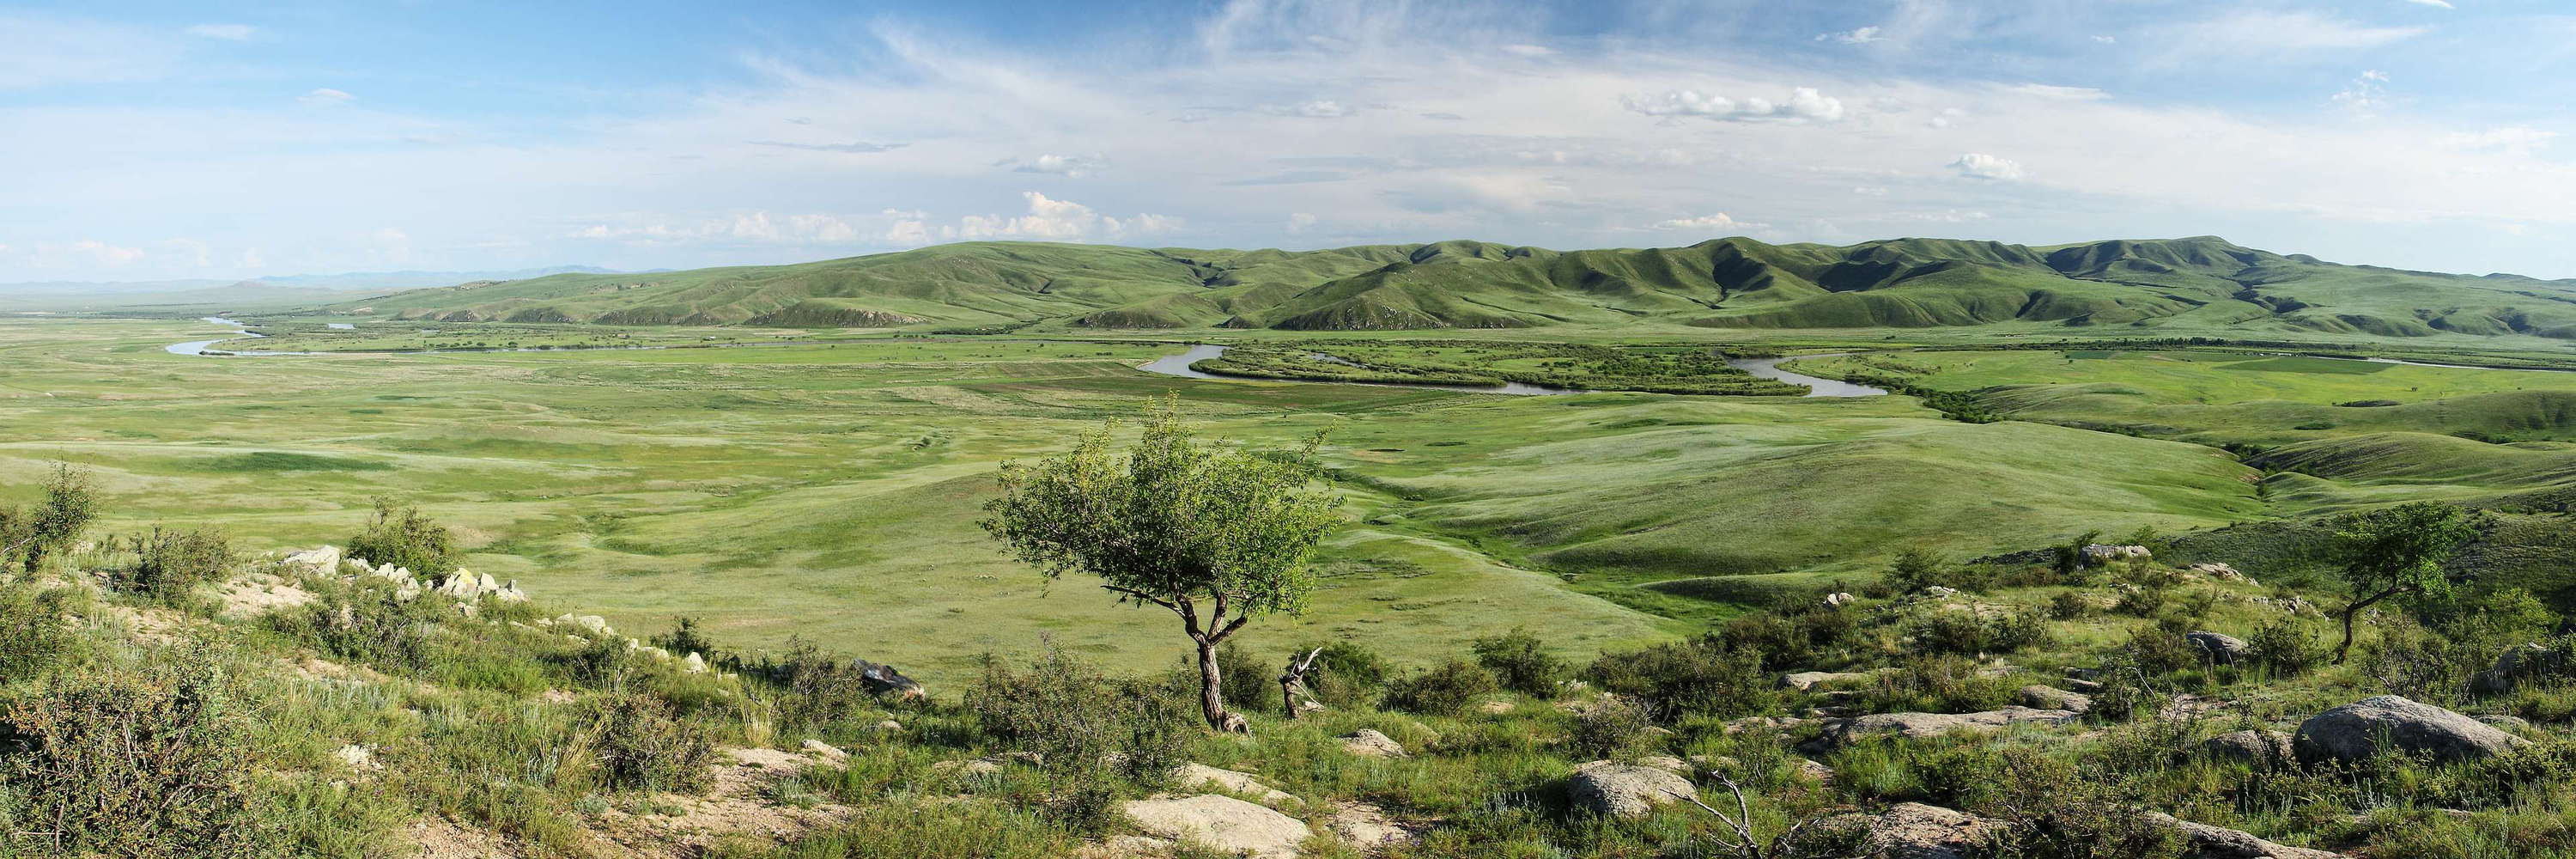 Orkhon Valley  |  Panorama